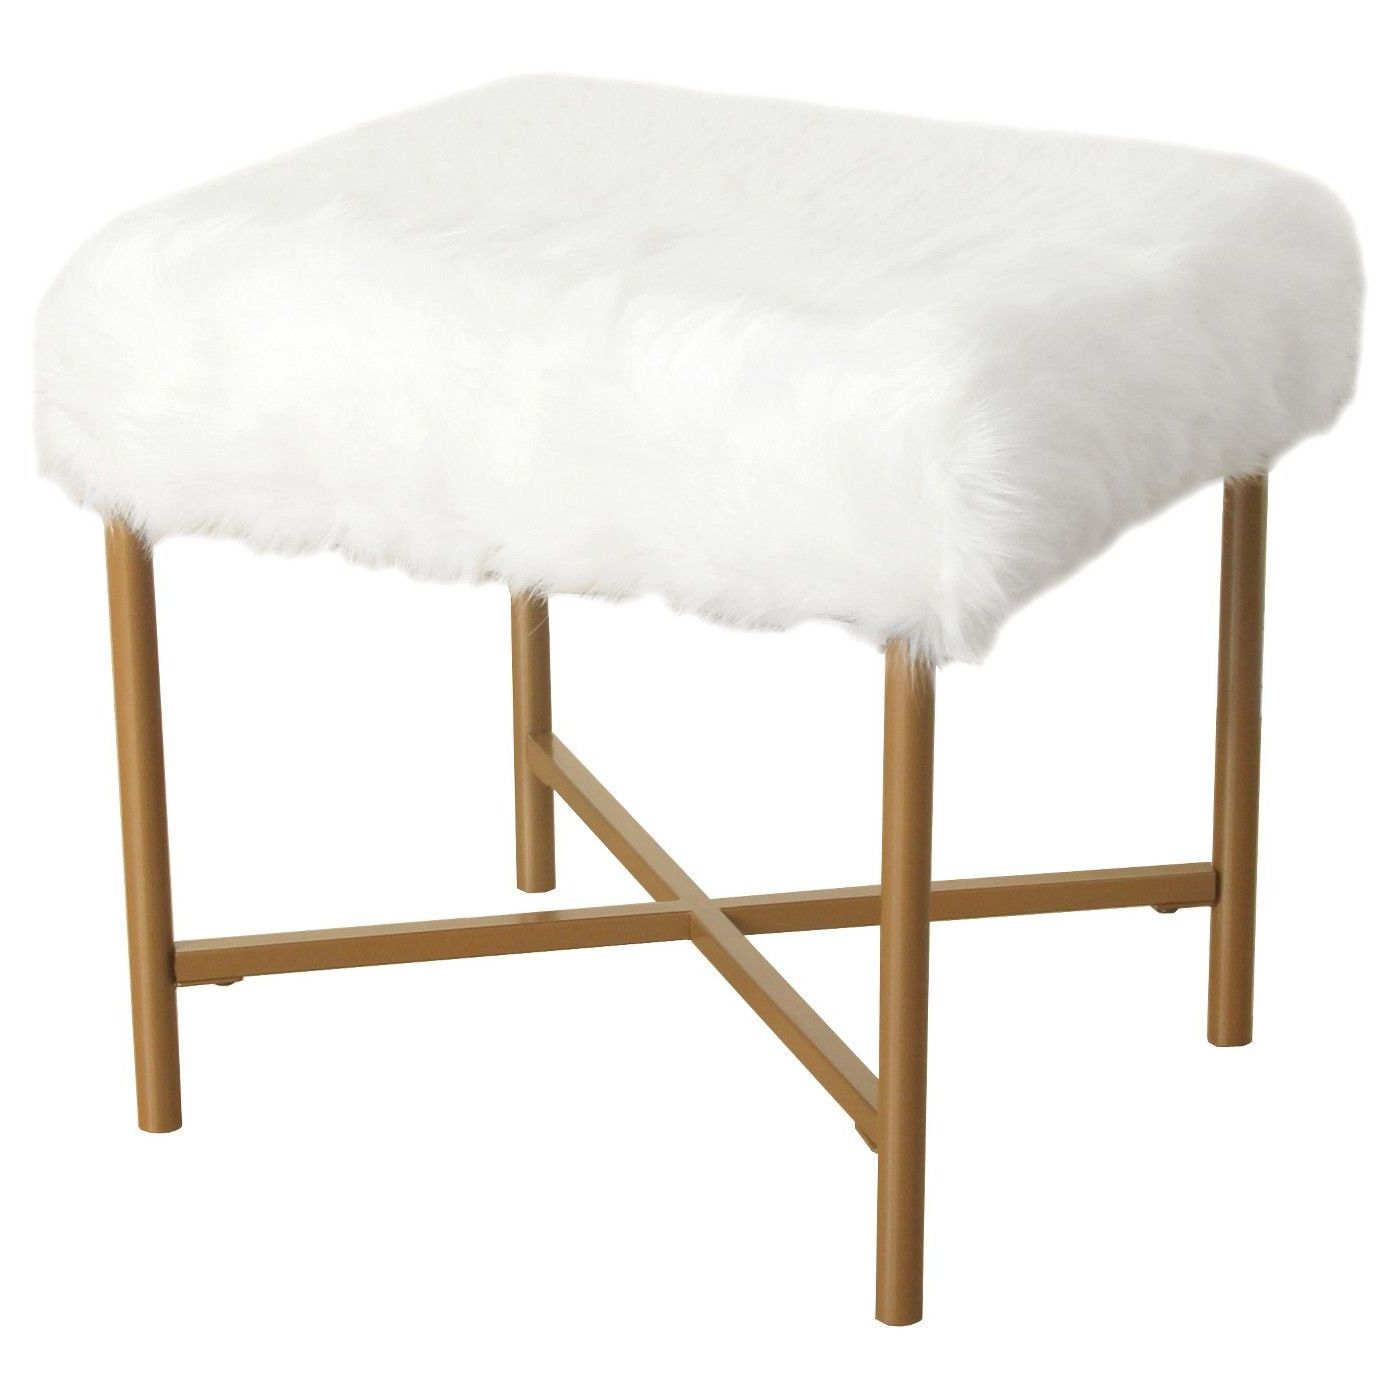 Upholstered Stool, Homepop Pertaining To Most Recent White Faux Fur Round Ottomans (View 1 of 10)